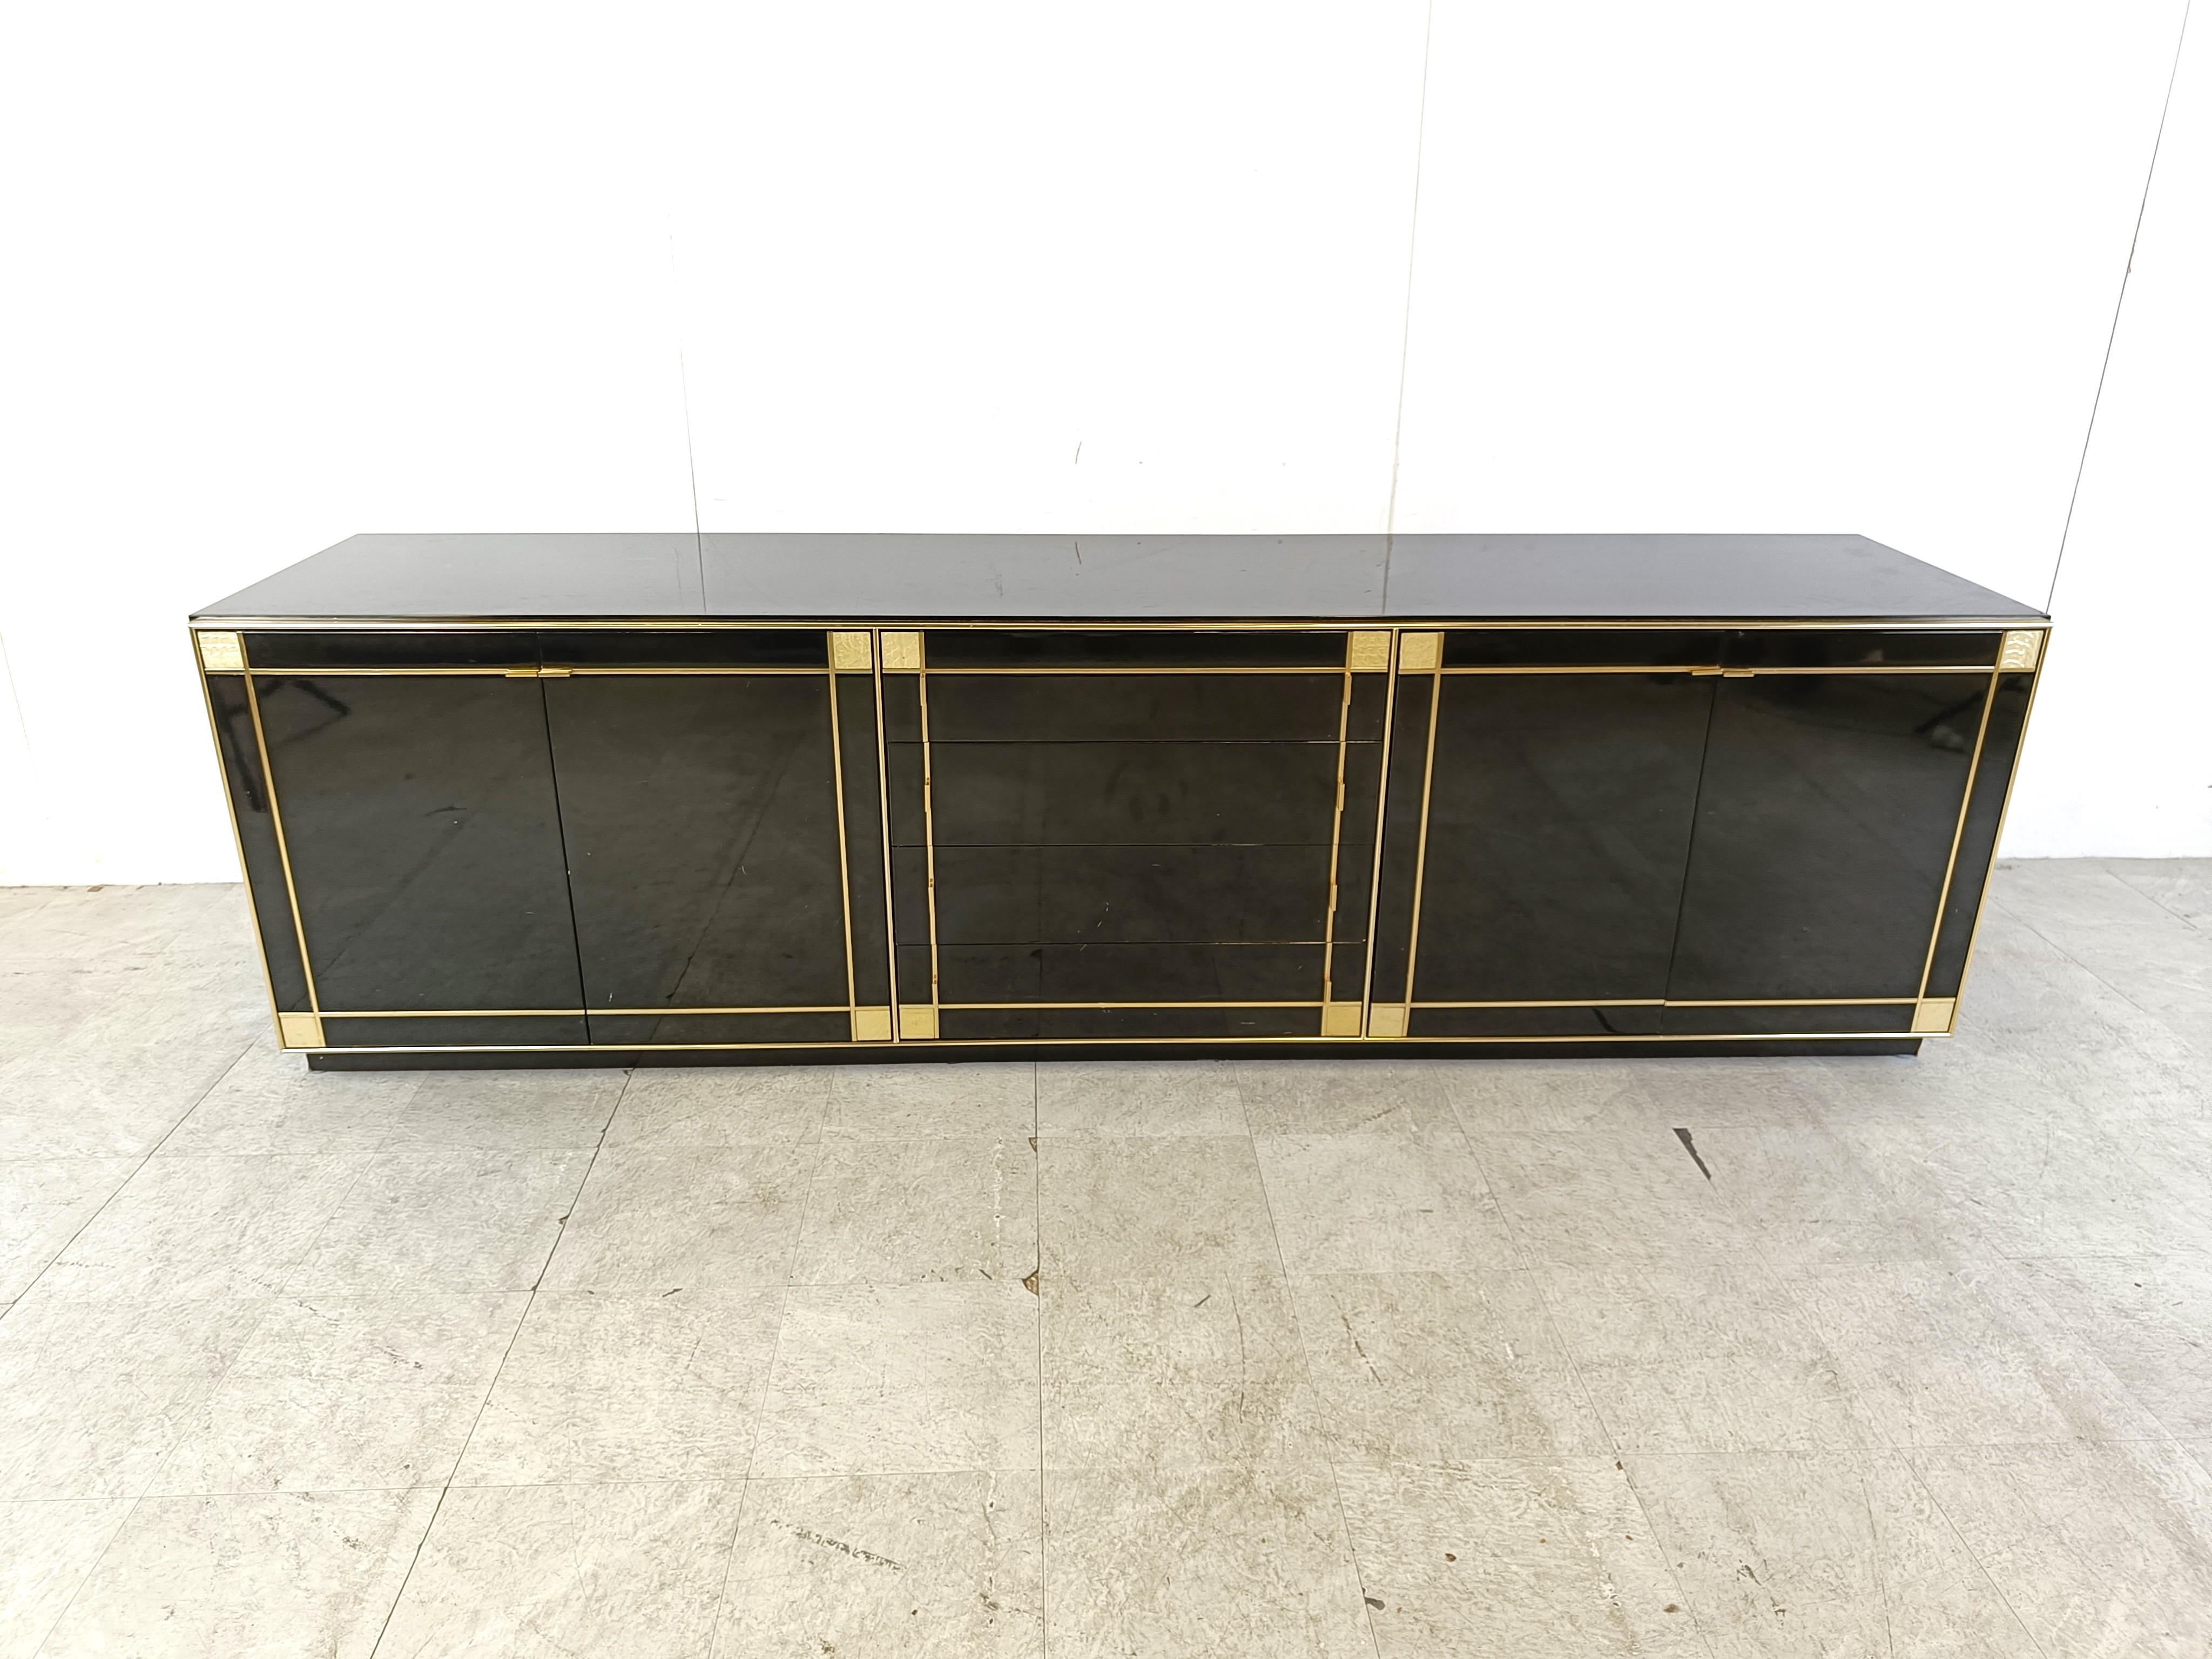 Hollywood Regency Vintage Black Lacquered Sideboard in Brass by Pierre Cardin, 1980s For Sale